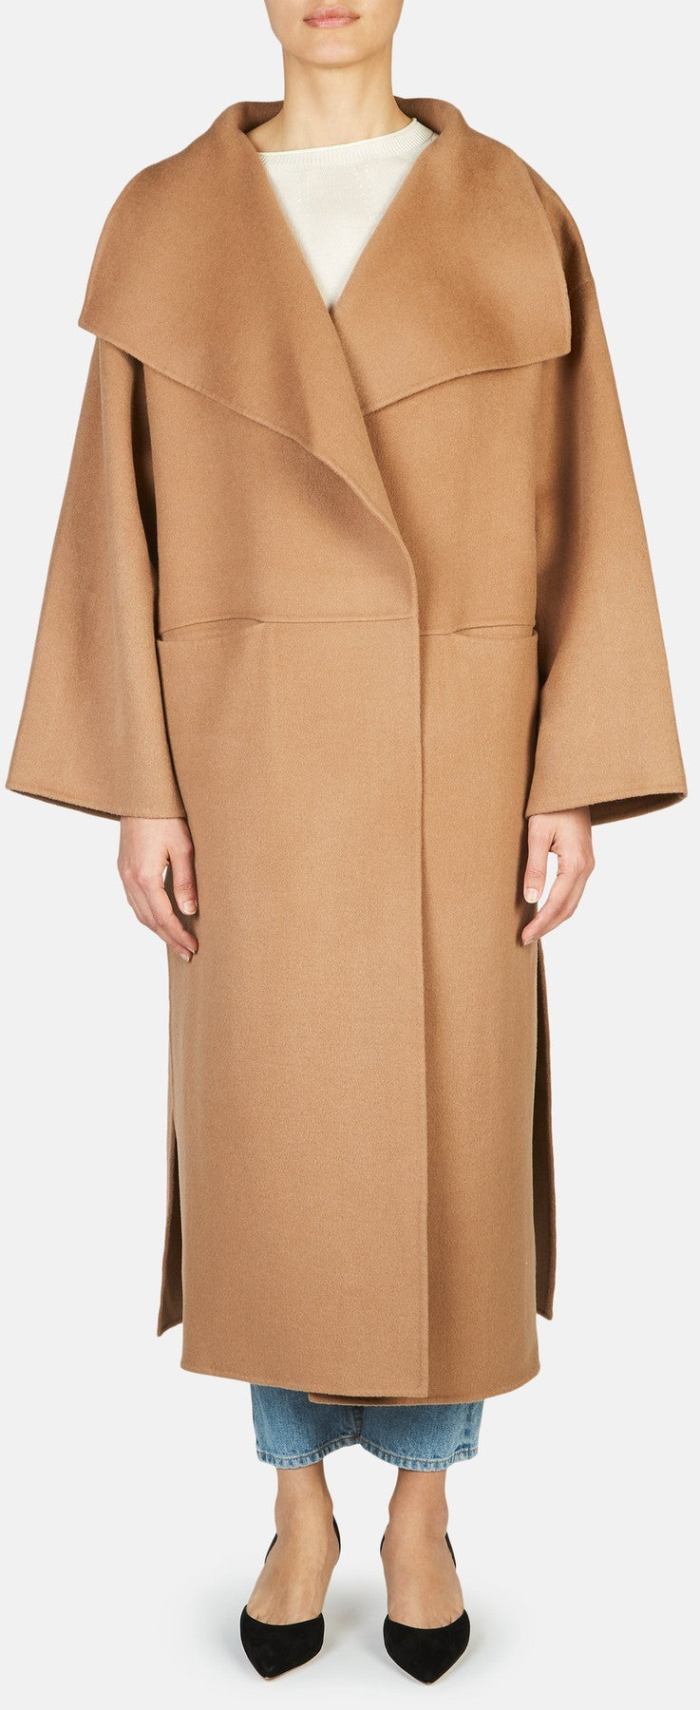 'Annecy' Draped Lapel Coat - Camel *Very Low Stock*